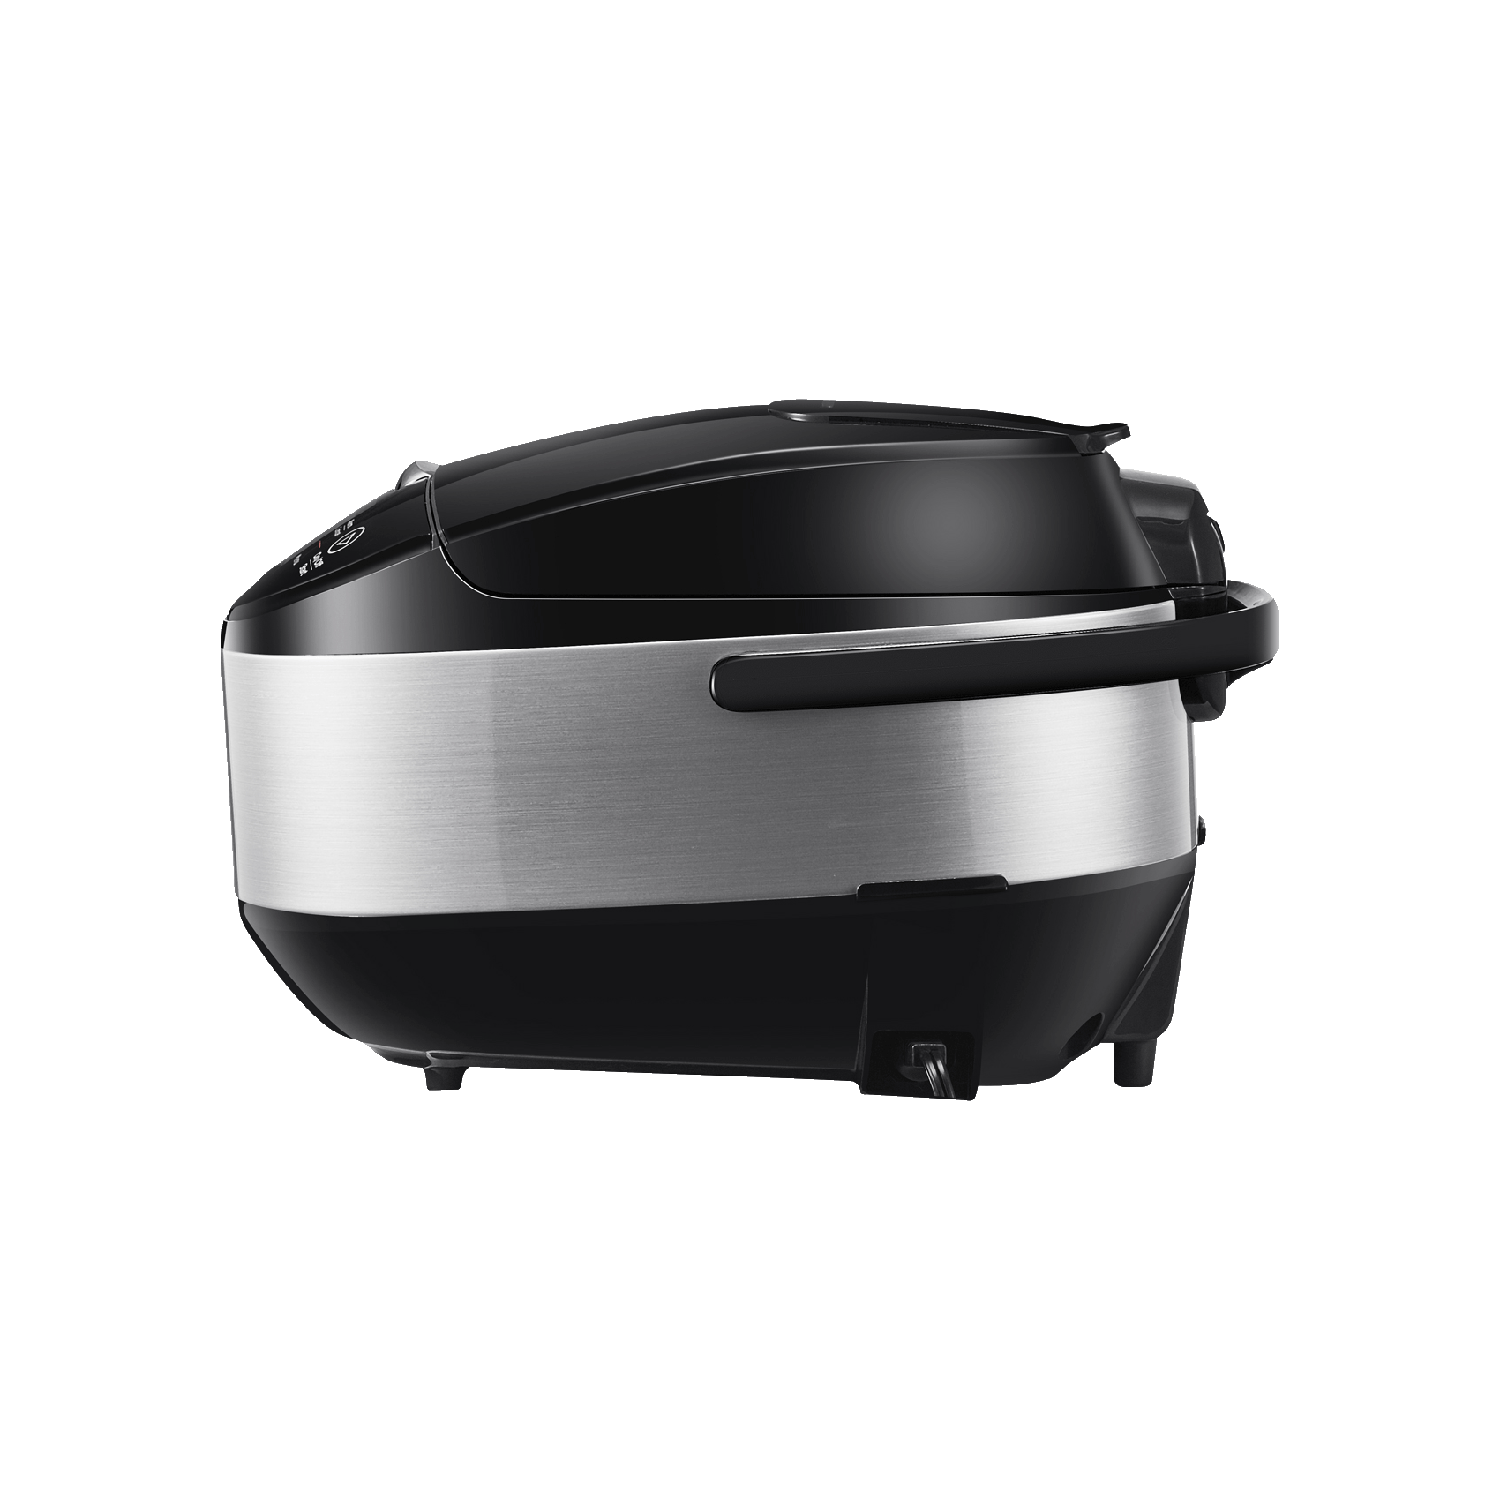 https://d1pjg4o0tbonat.cloudfront.net/content/dam/comfee-aem/global/products/small-appliances/all-in-1-multi-cooker-rice-cooker-mb-fs5077/kv3.png/jcr:content/renditions/cq5dam.compression.png